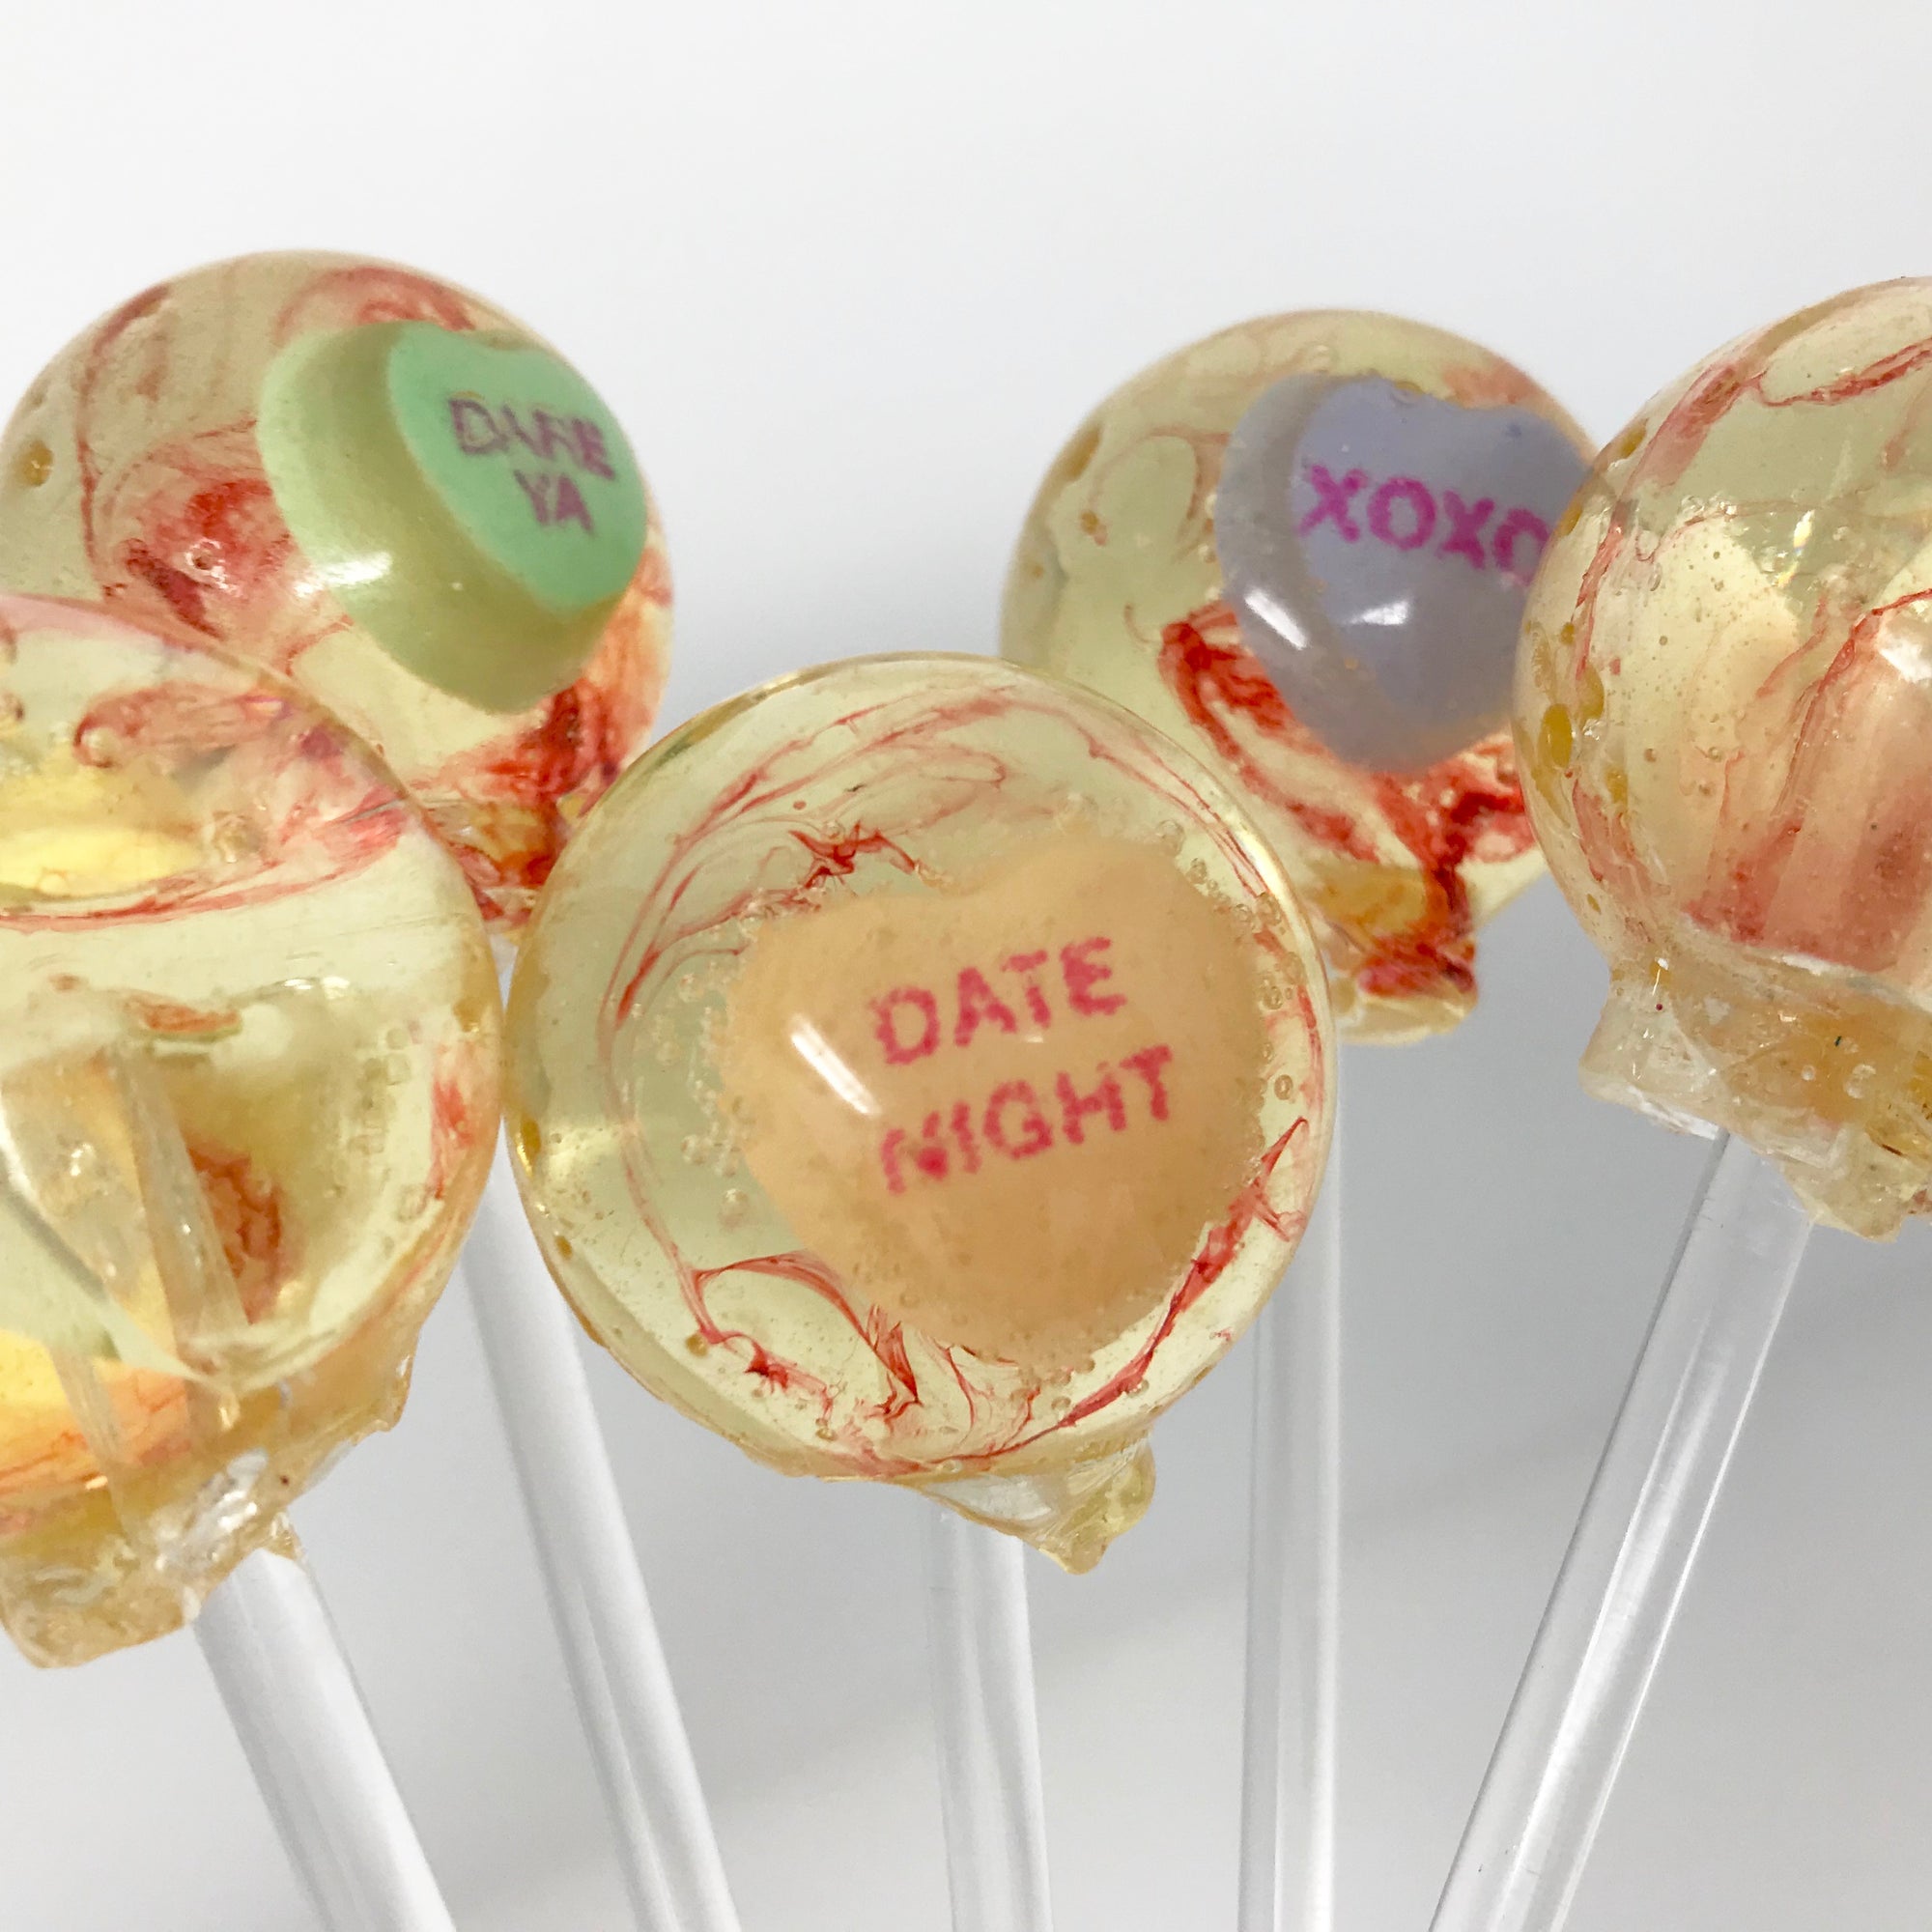 Conversation hearts lollipops by I Want Candy!